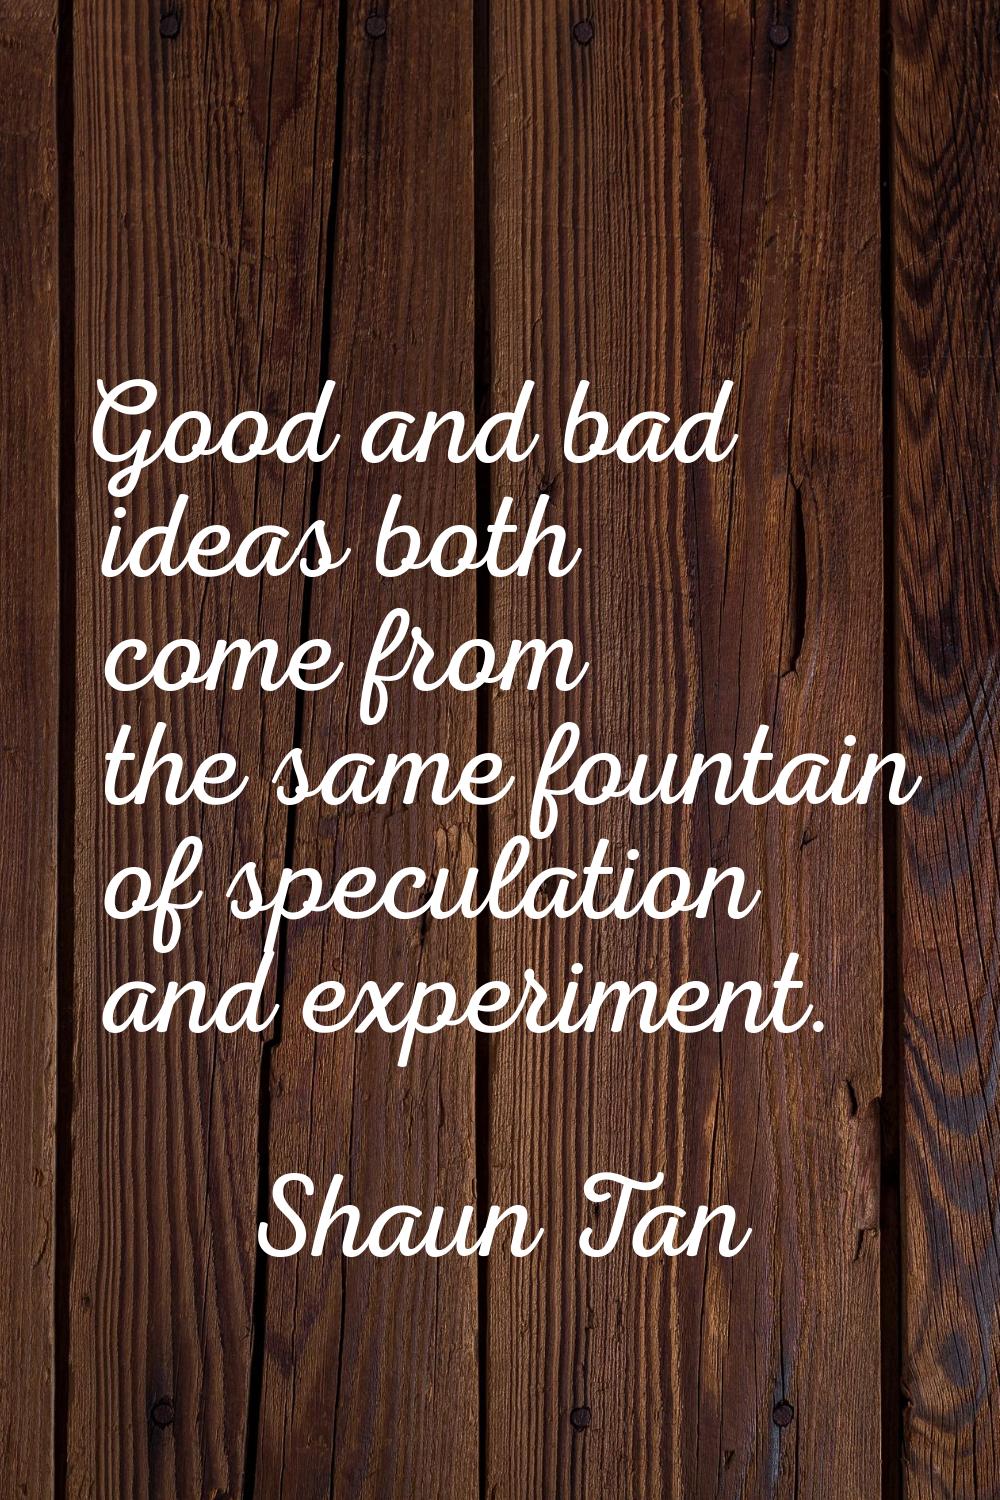 Good and bad ideas both come from the same fountain of speculation and experiment.